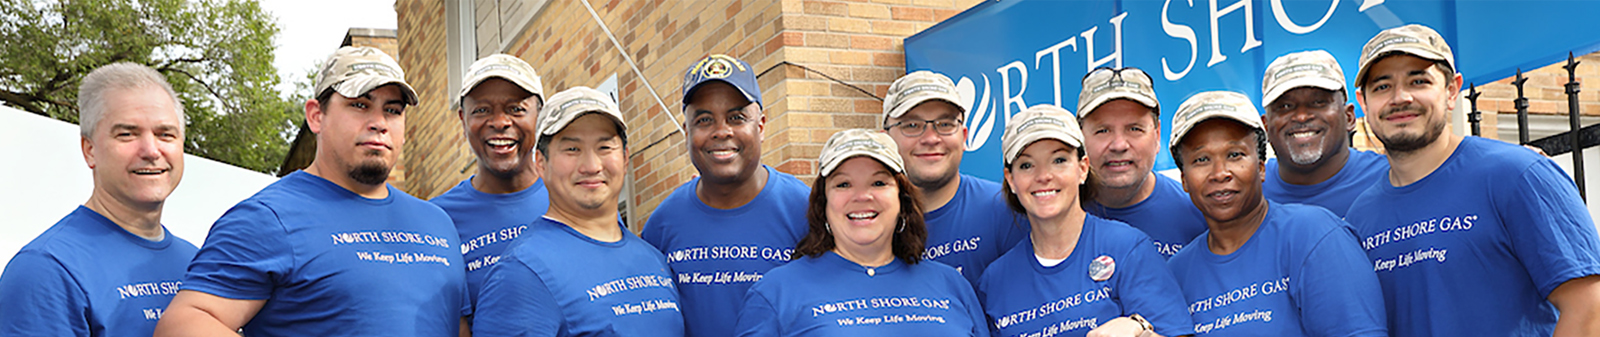 North Shore Gas employees